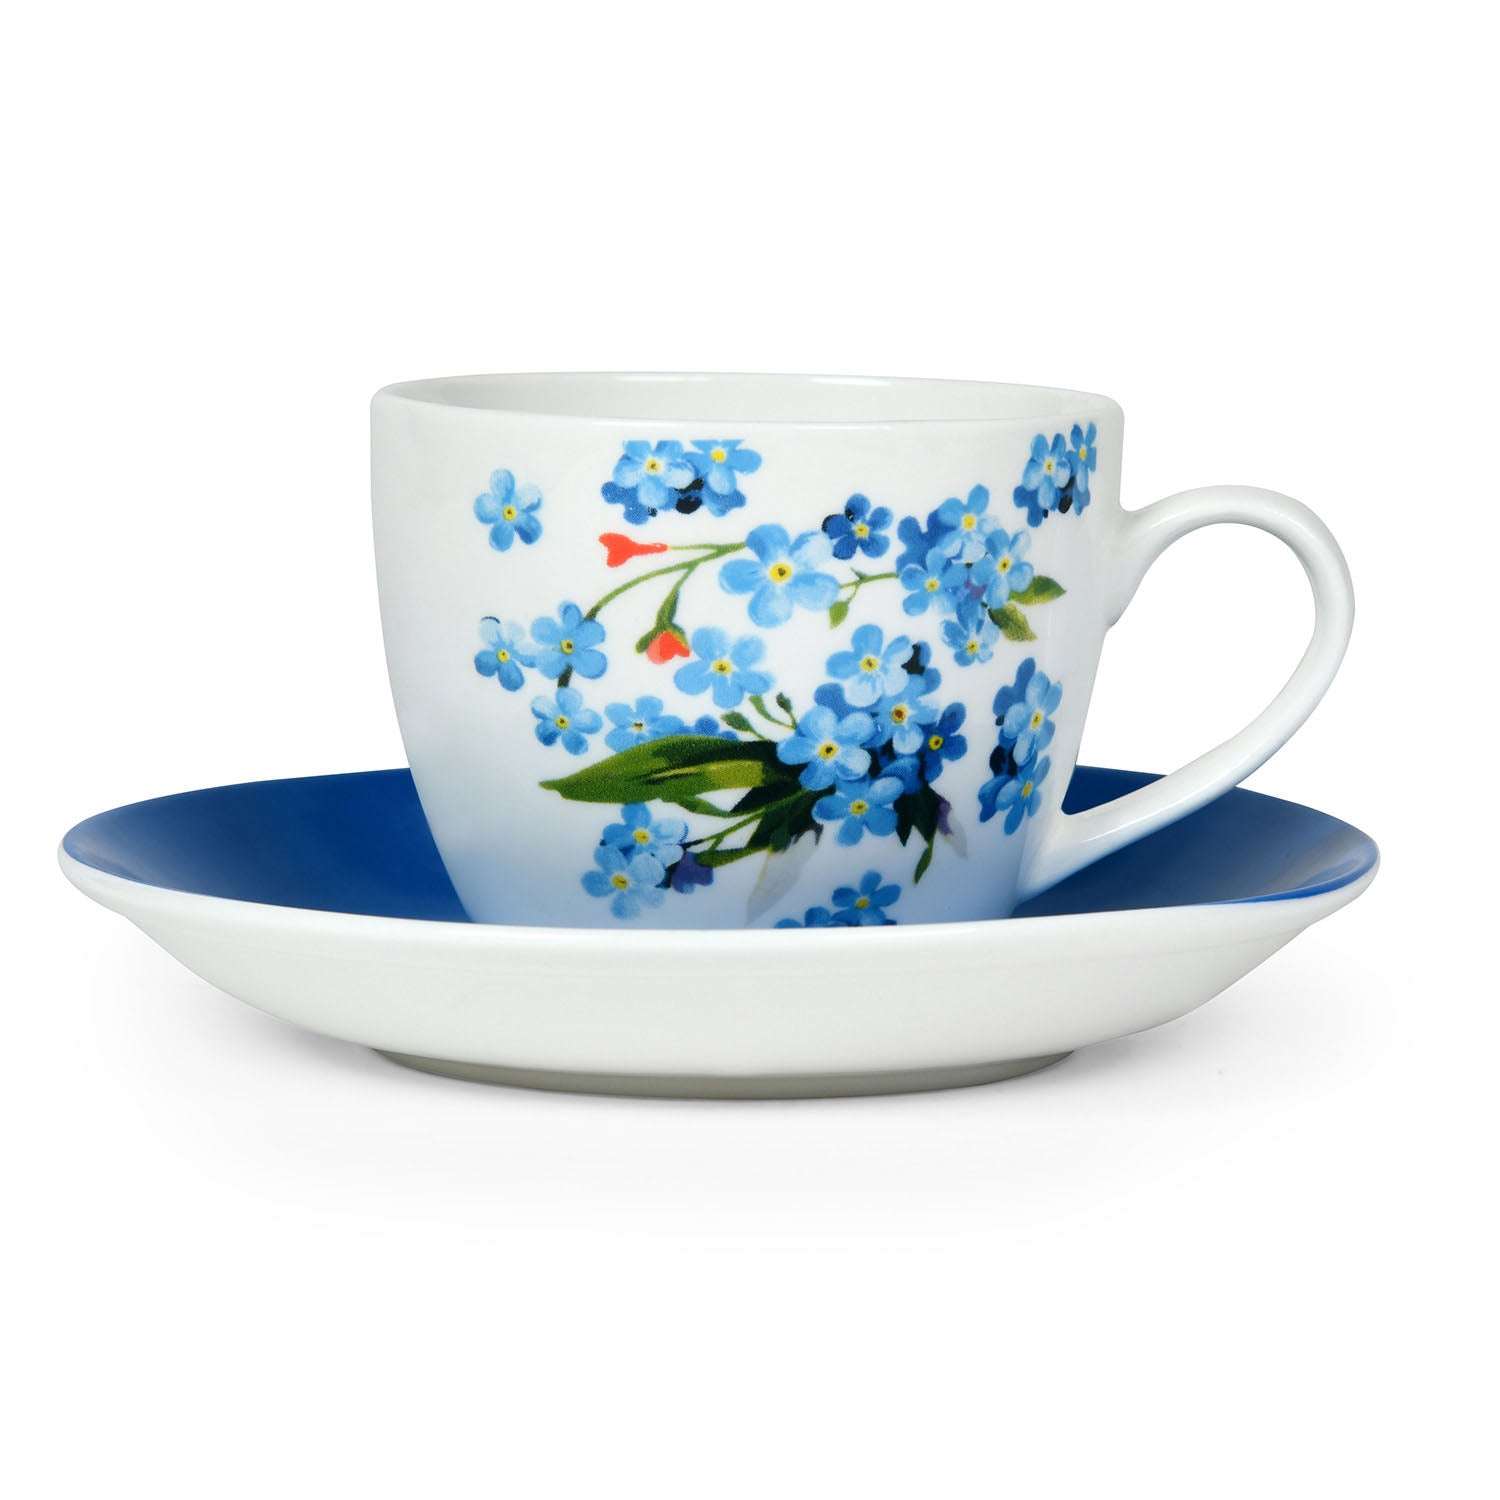 Clay Craft Ceramic 210 ml Cup & Saucer Set of 12 (Blue & White)